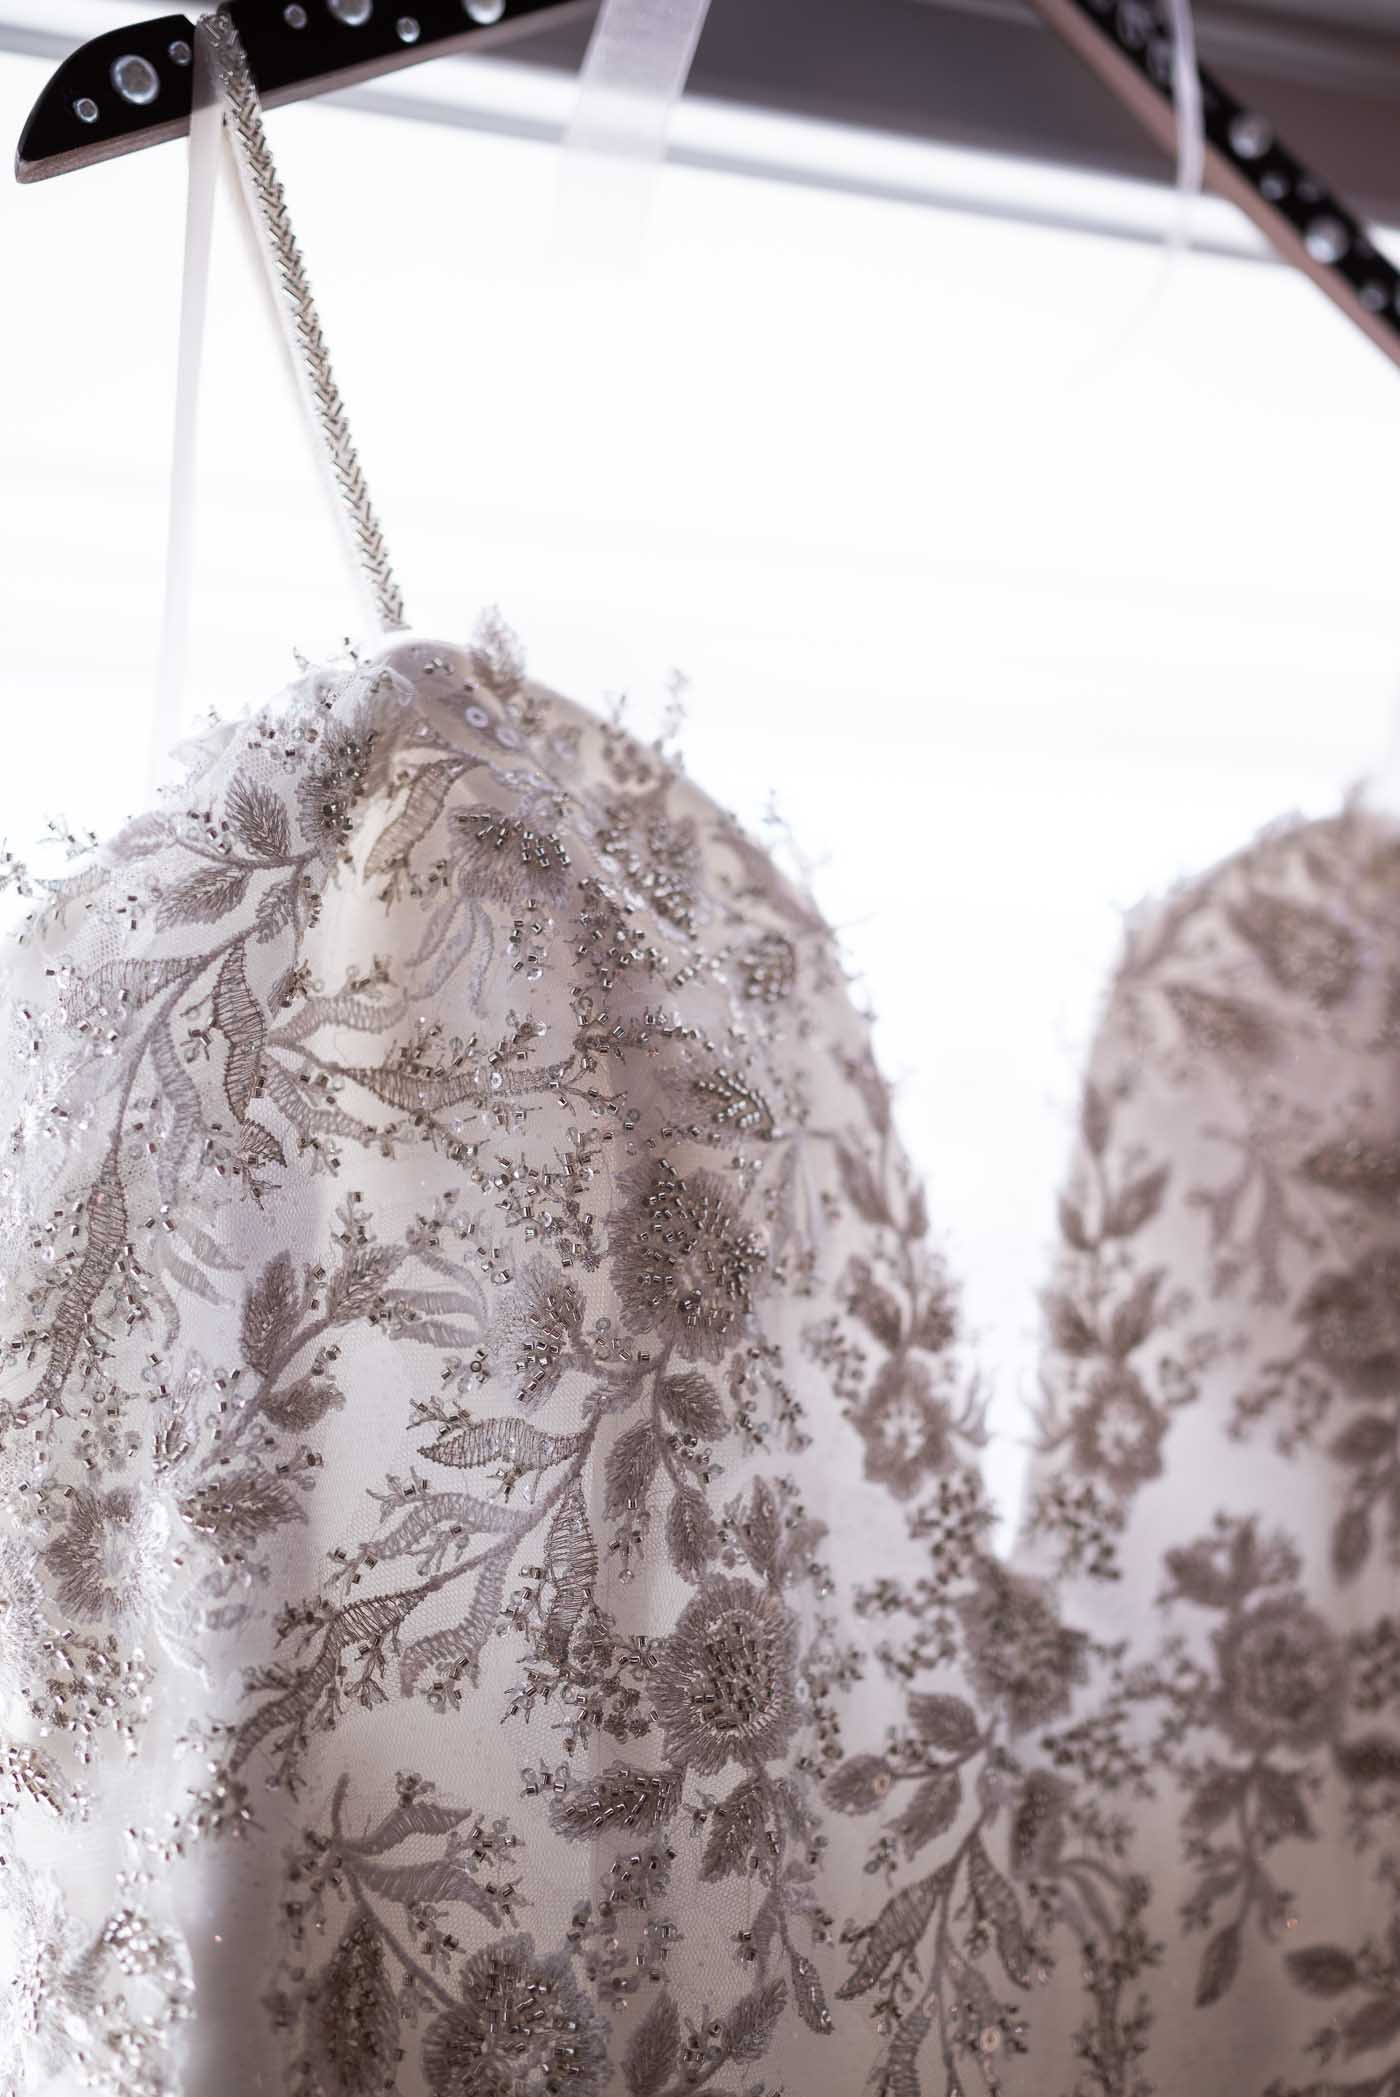 Detail photo of the neckline of the dress